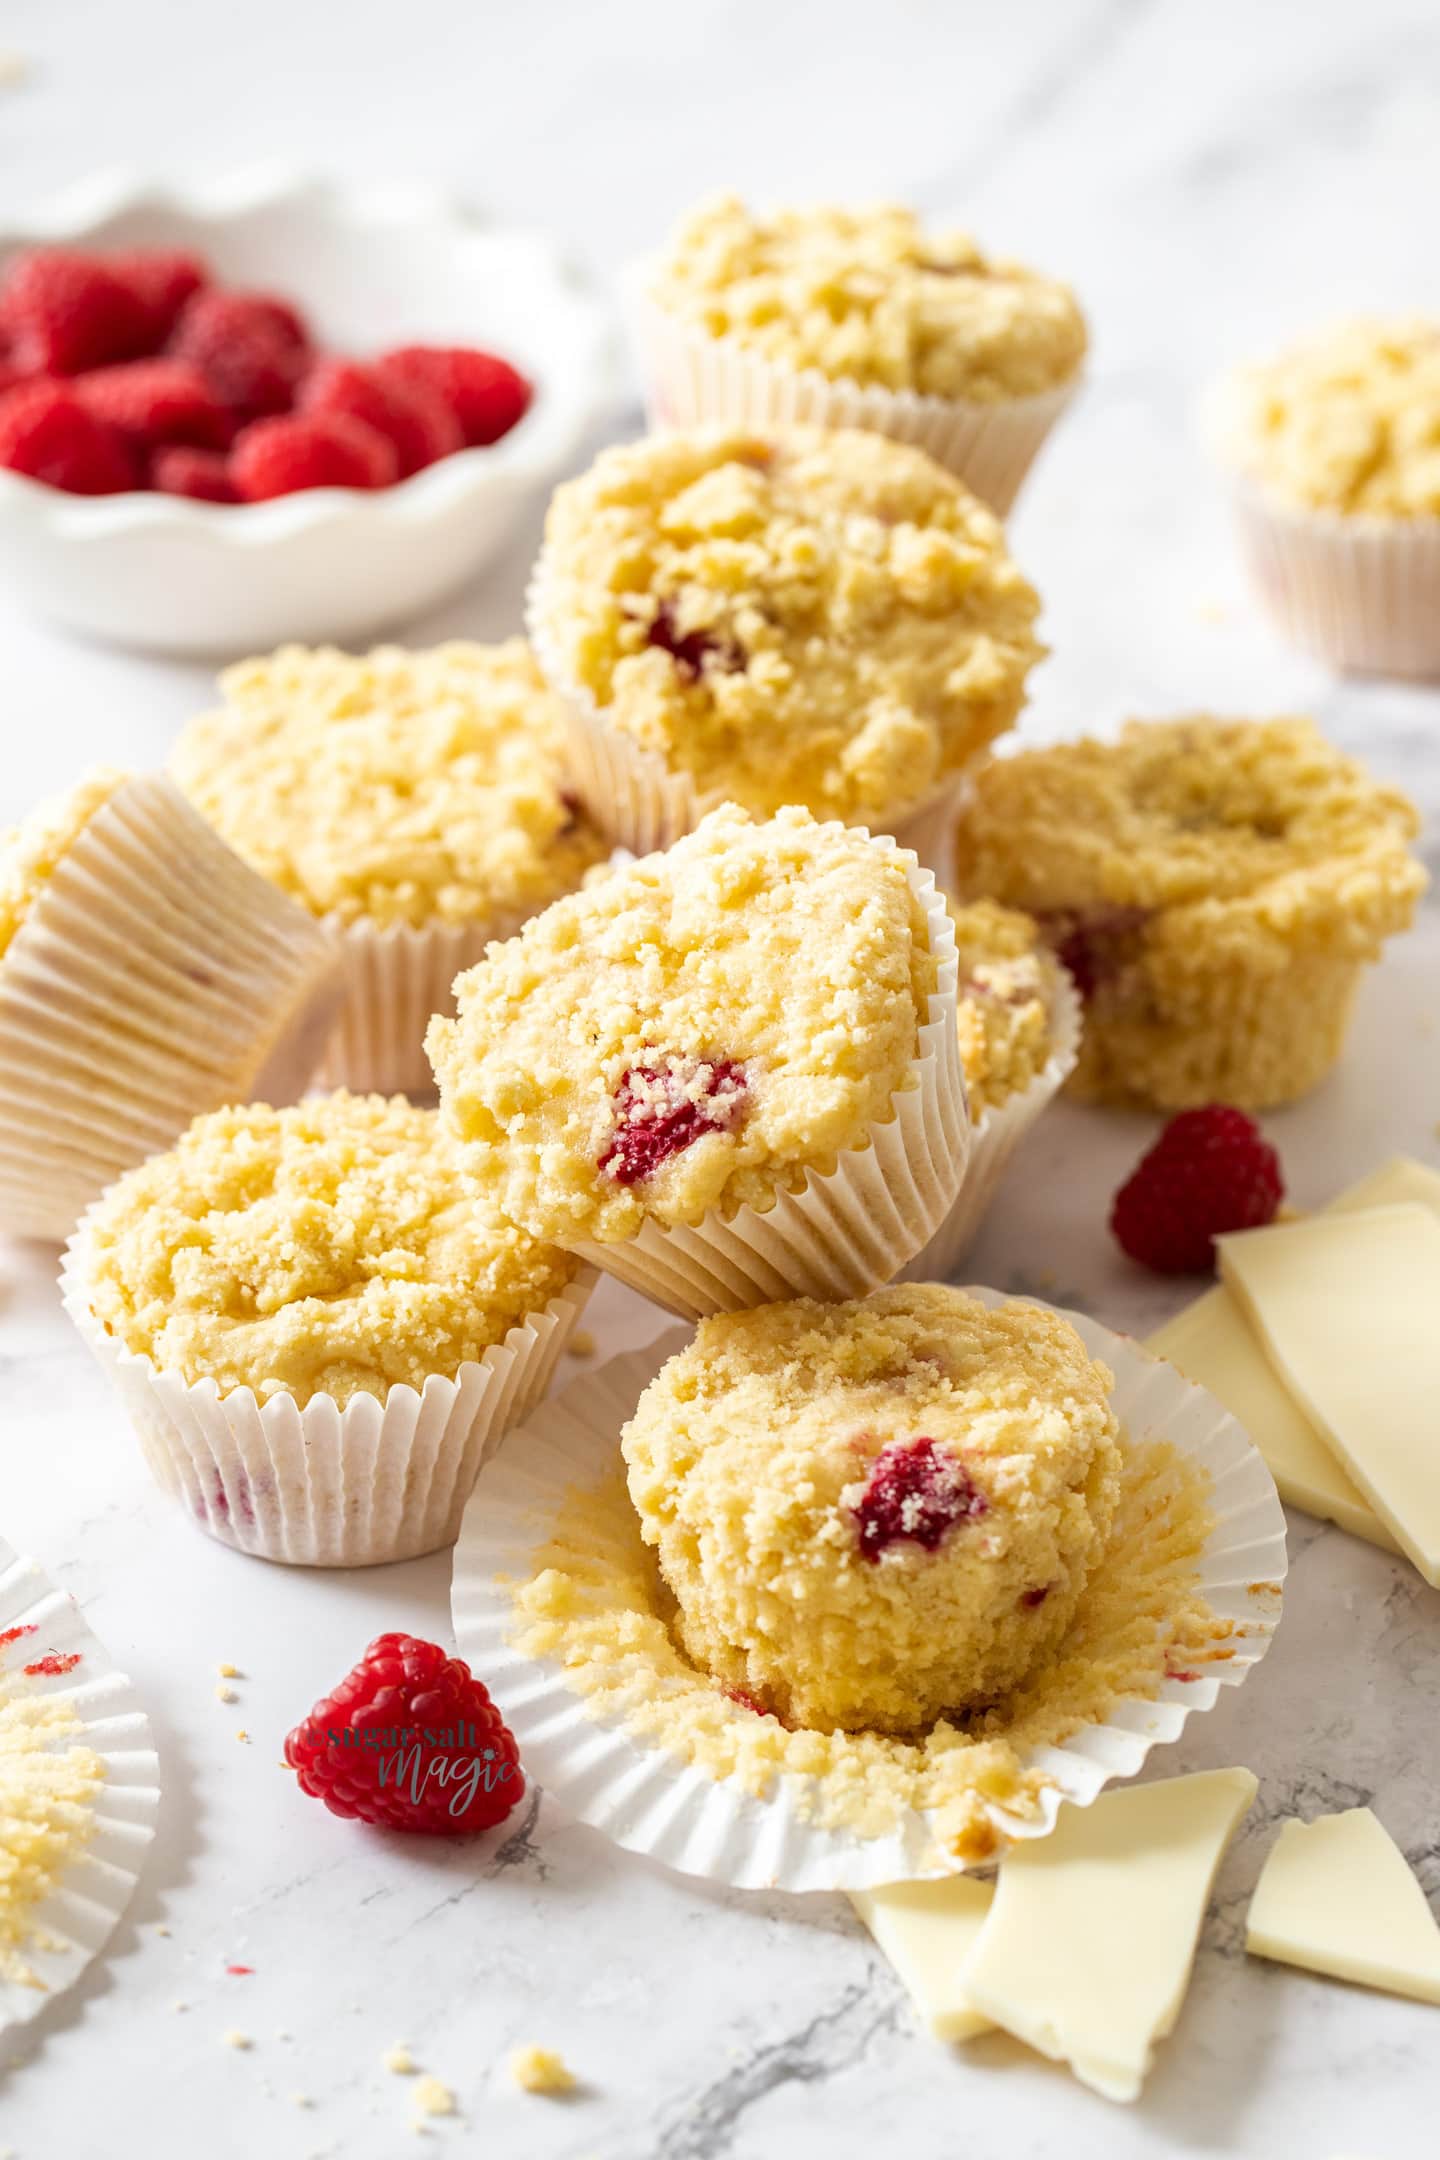 A batch of muffins with raspberries around them on a marble benchtop.